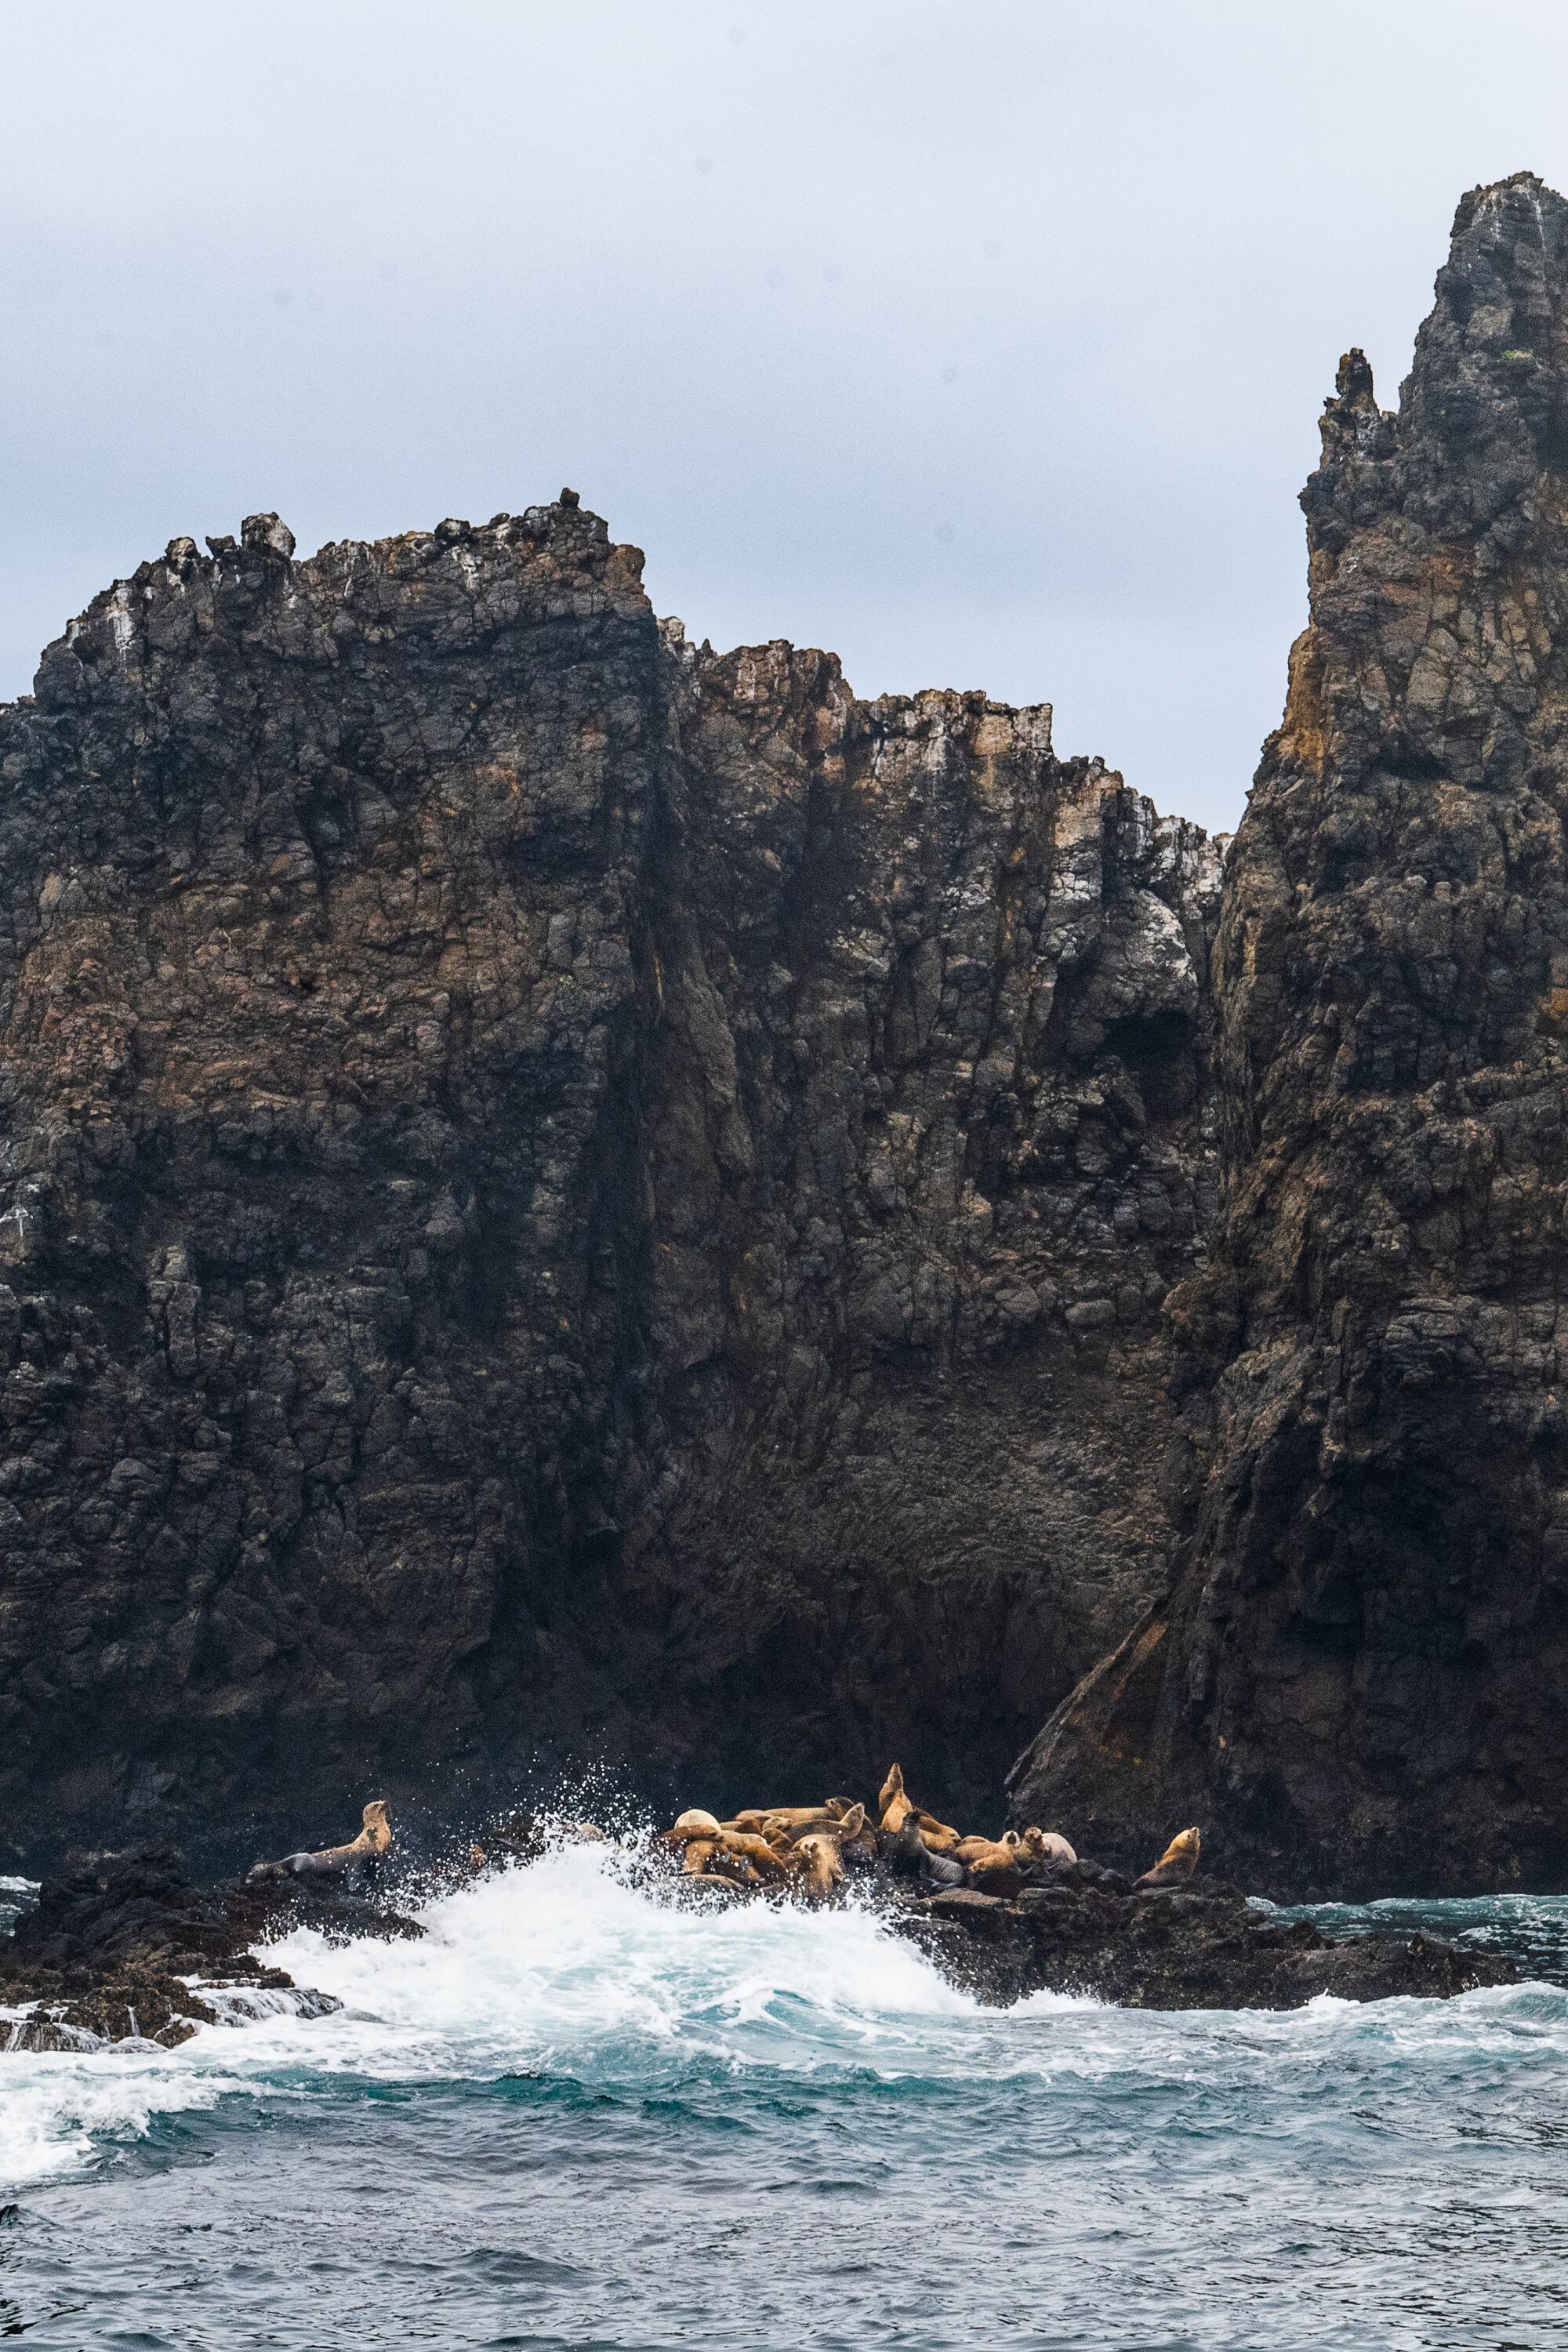 A pod of California sea lions rests on a rocky jetty at the East Point of Anacapa Island.